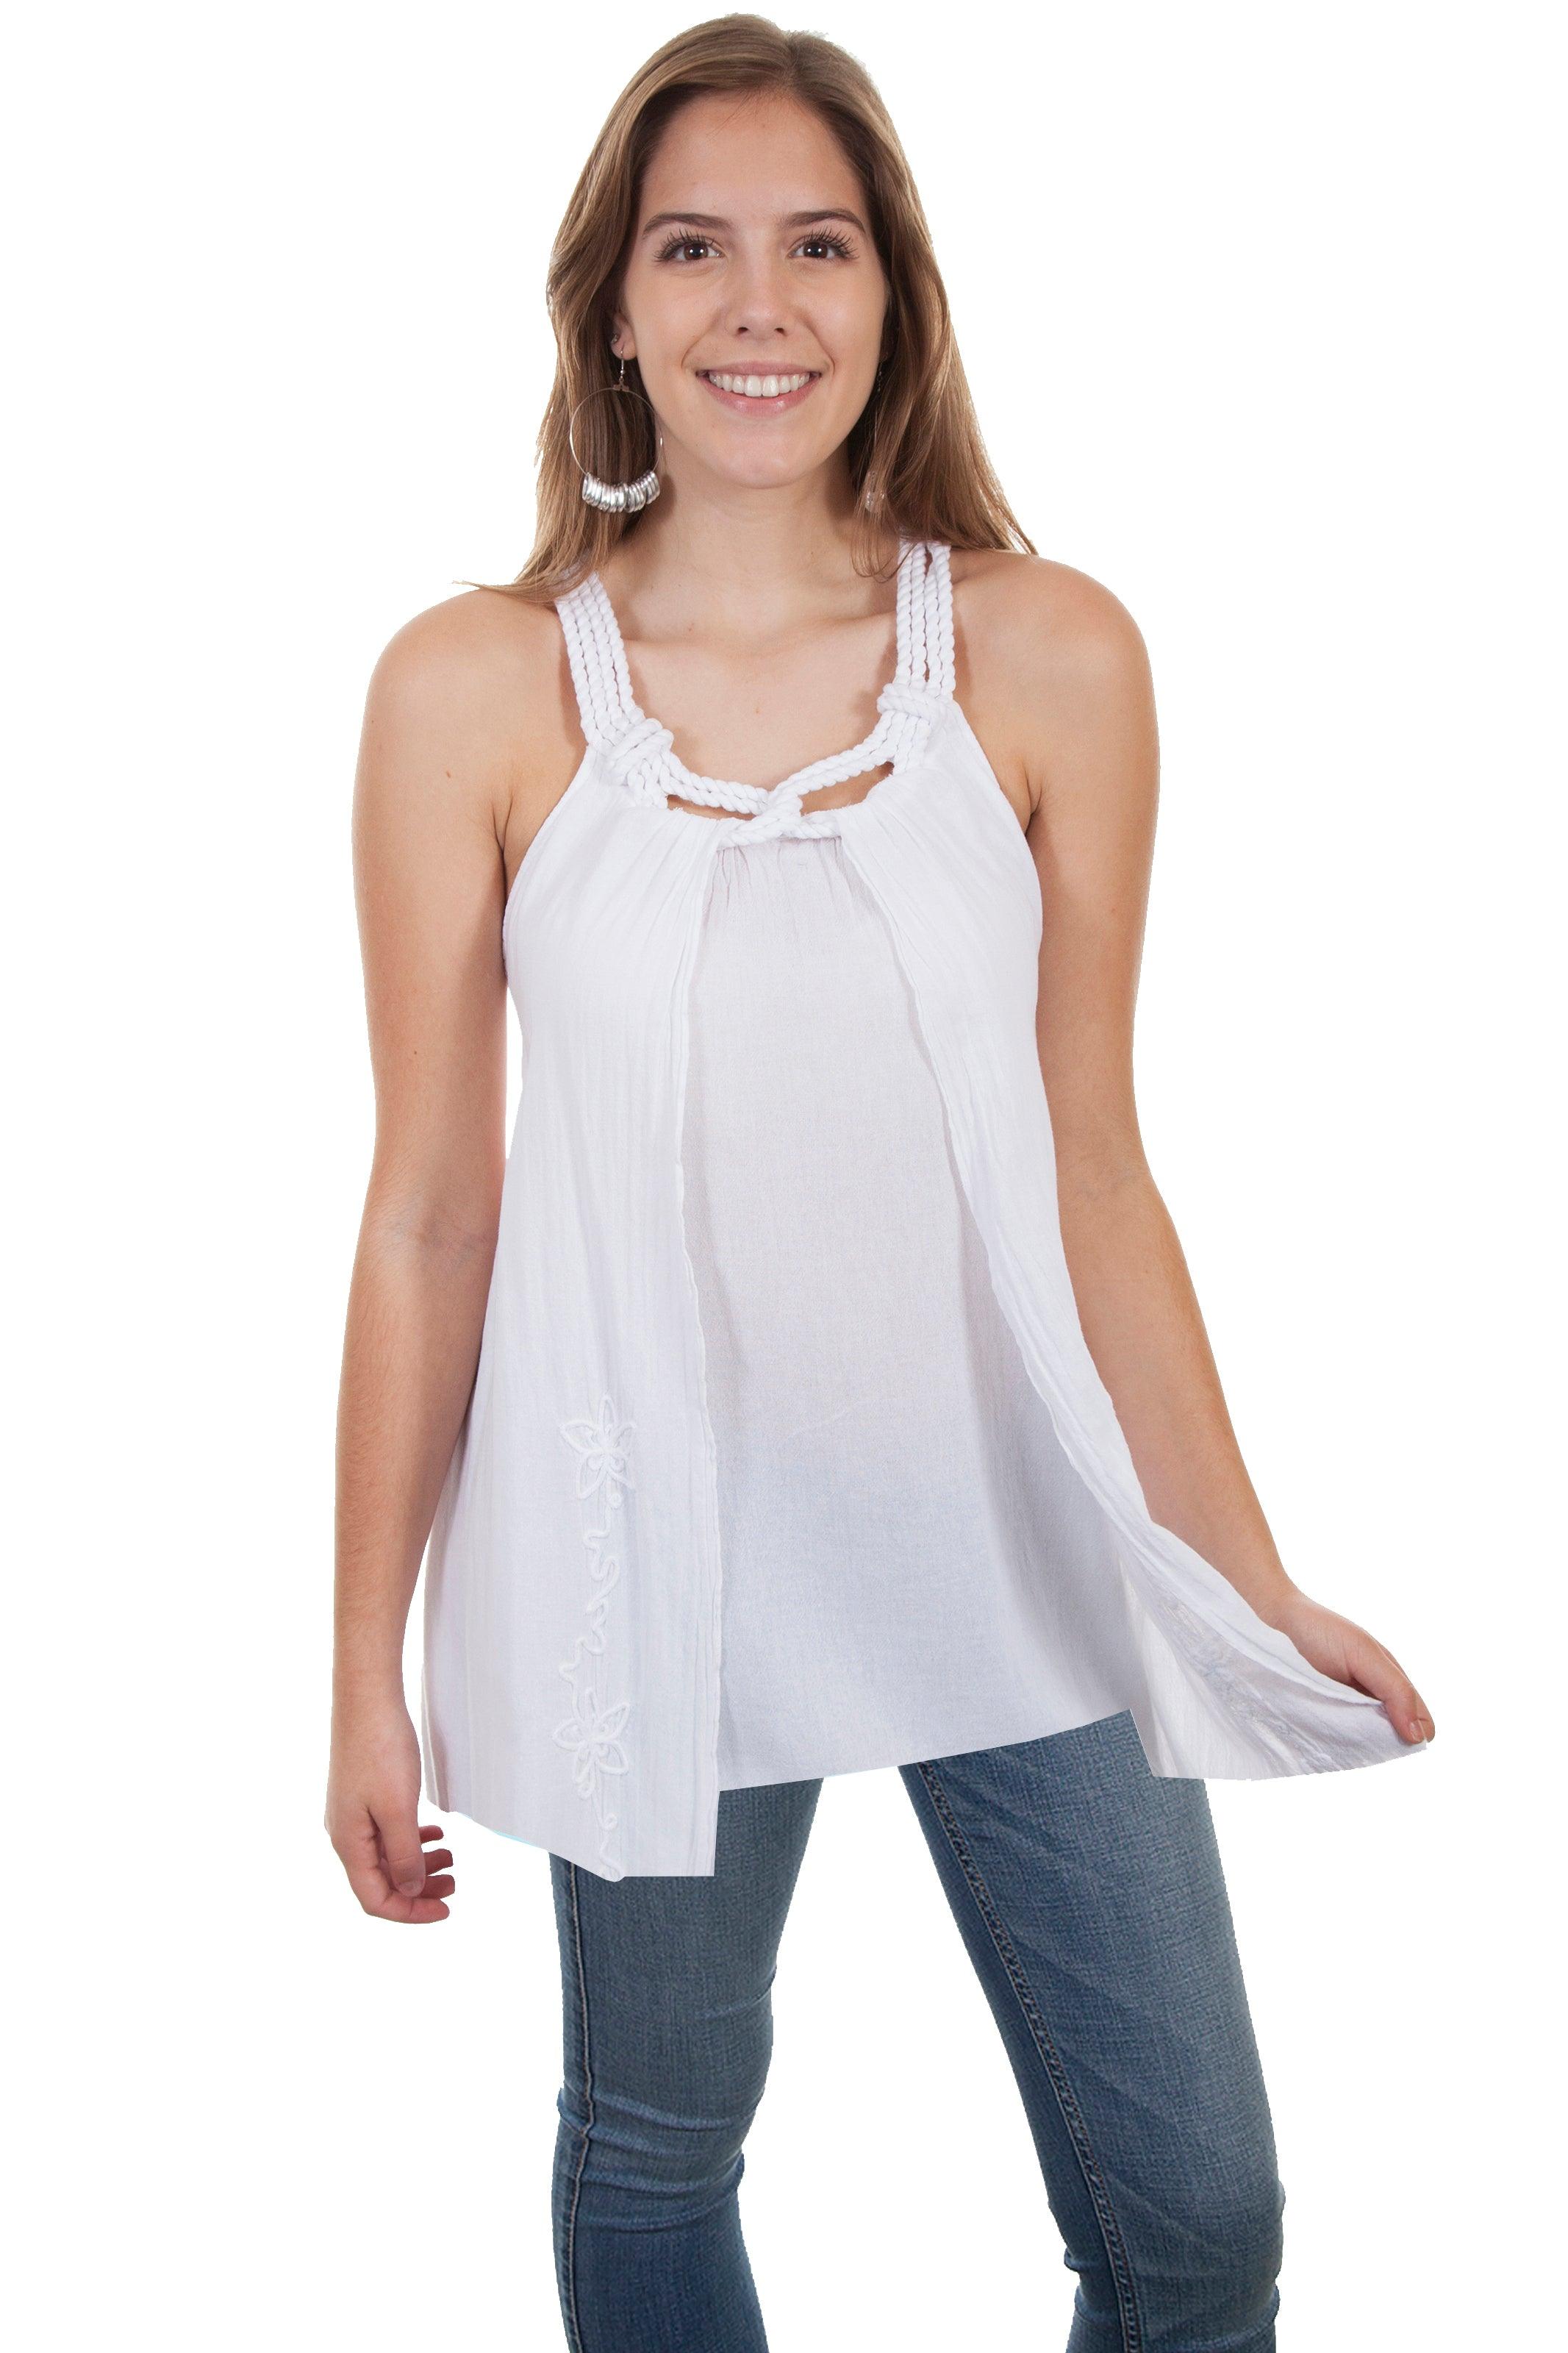 Scully WHITE ROPE STRAP BLOUSE - Flyclothing LLC